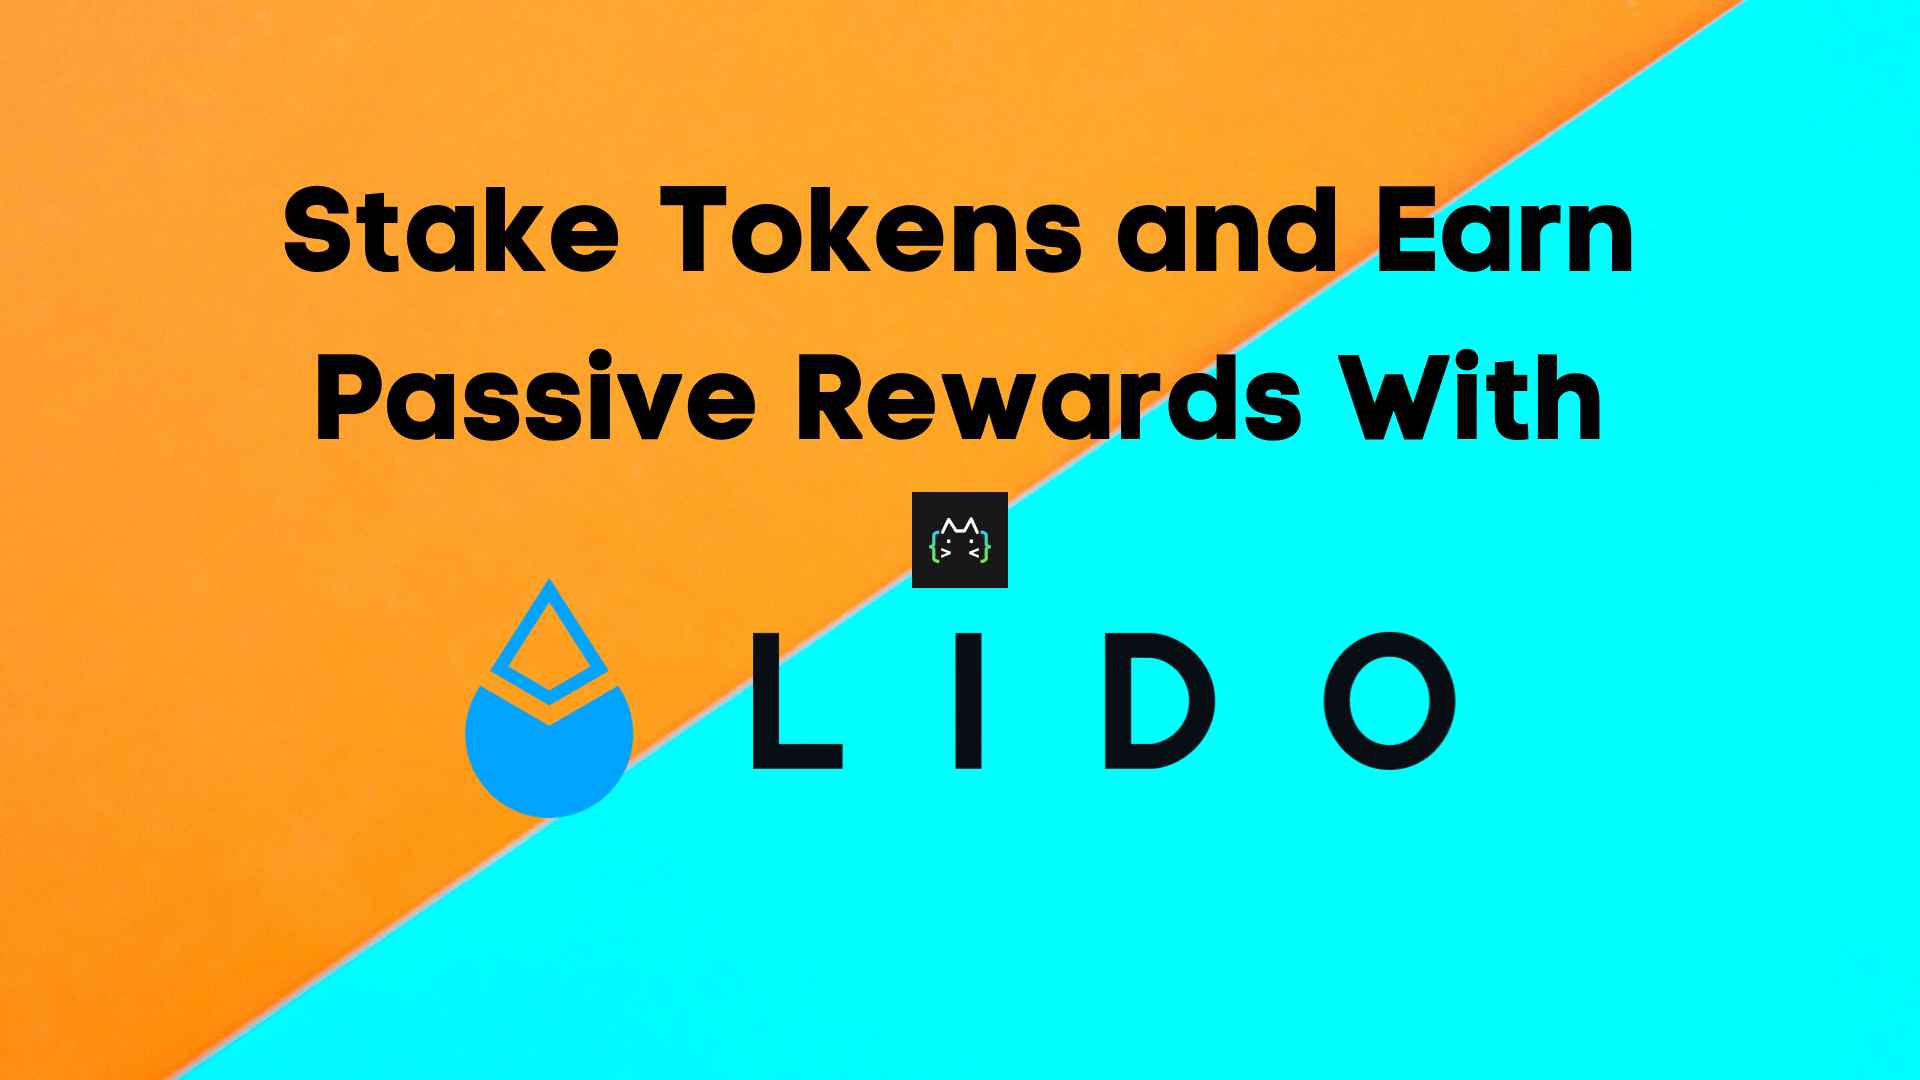 How To Stake Tokens and Earn Passive Rewards Using Lido Finance